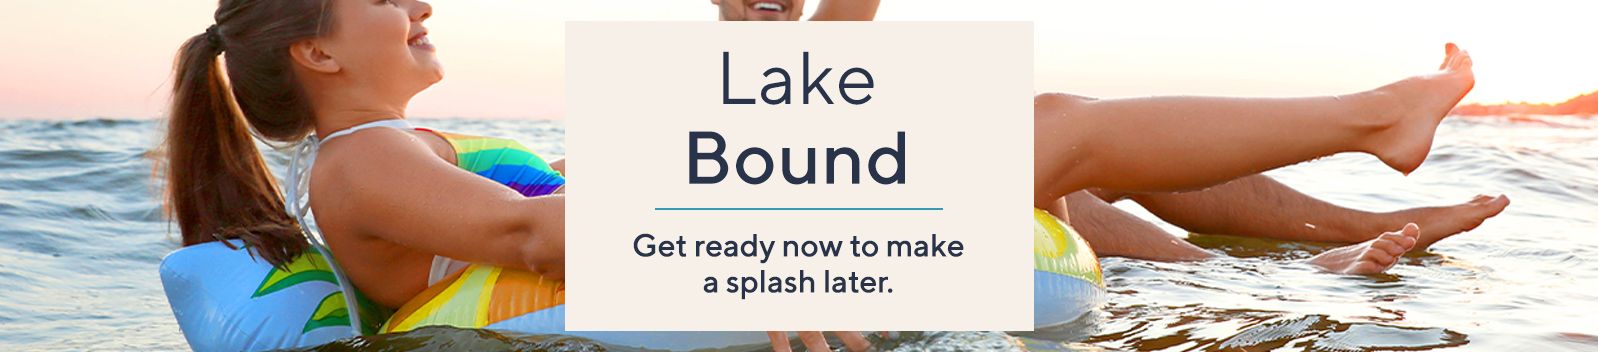 Lake Bound.  Get ready now to make a splash later.